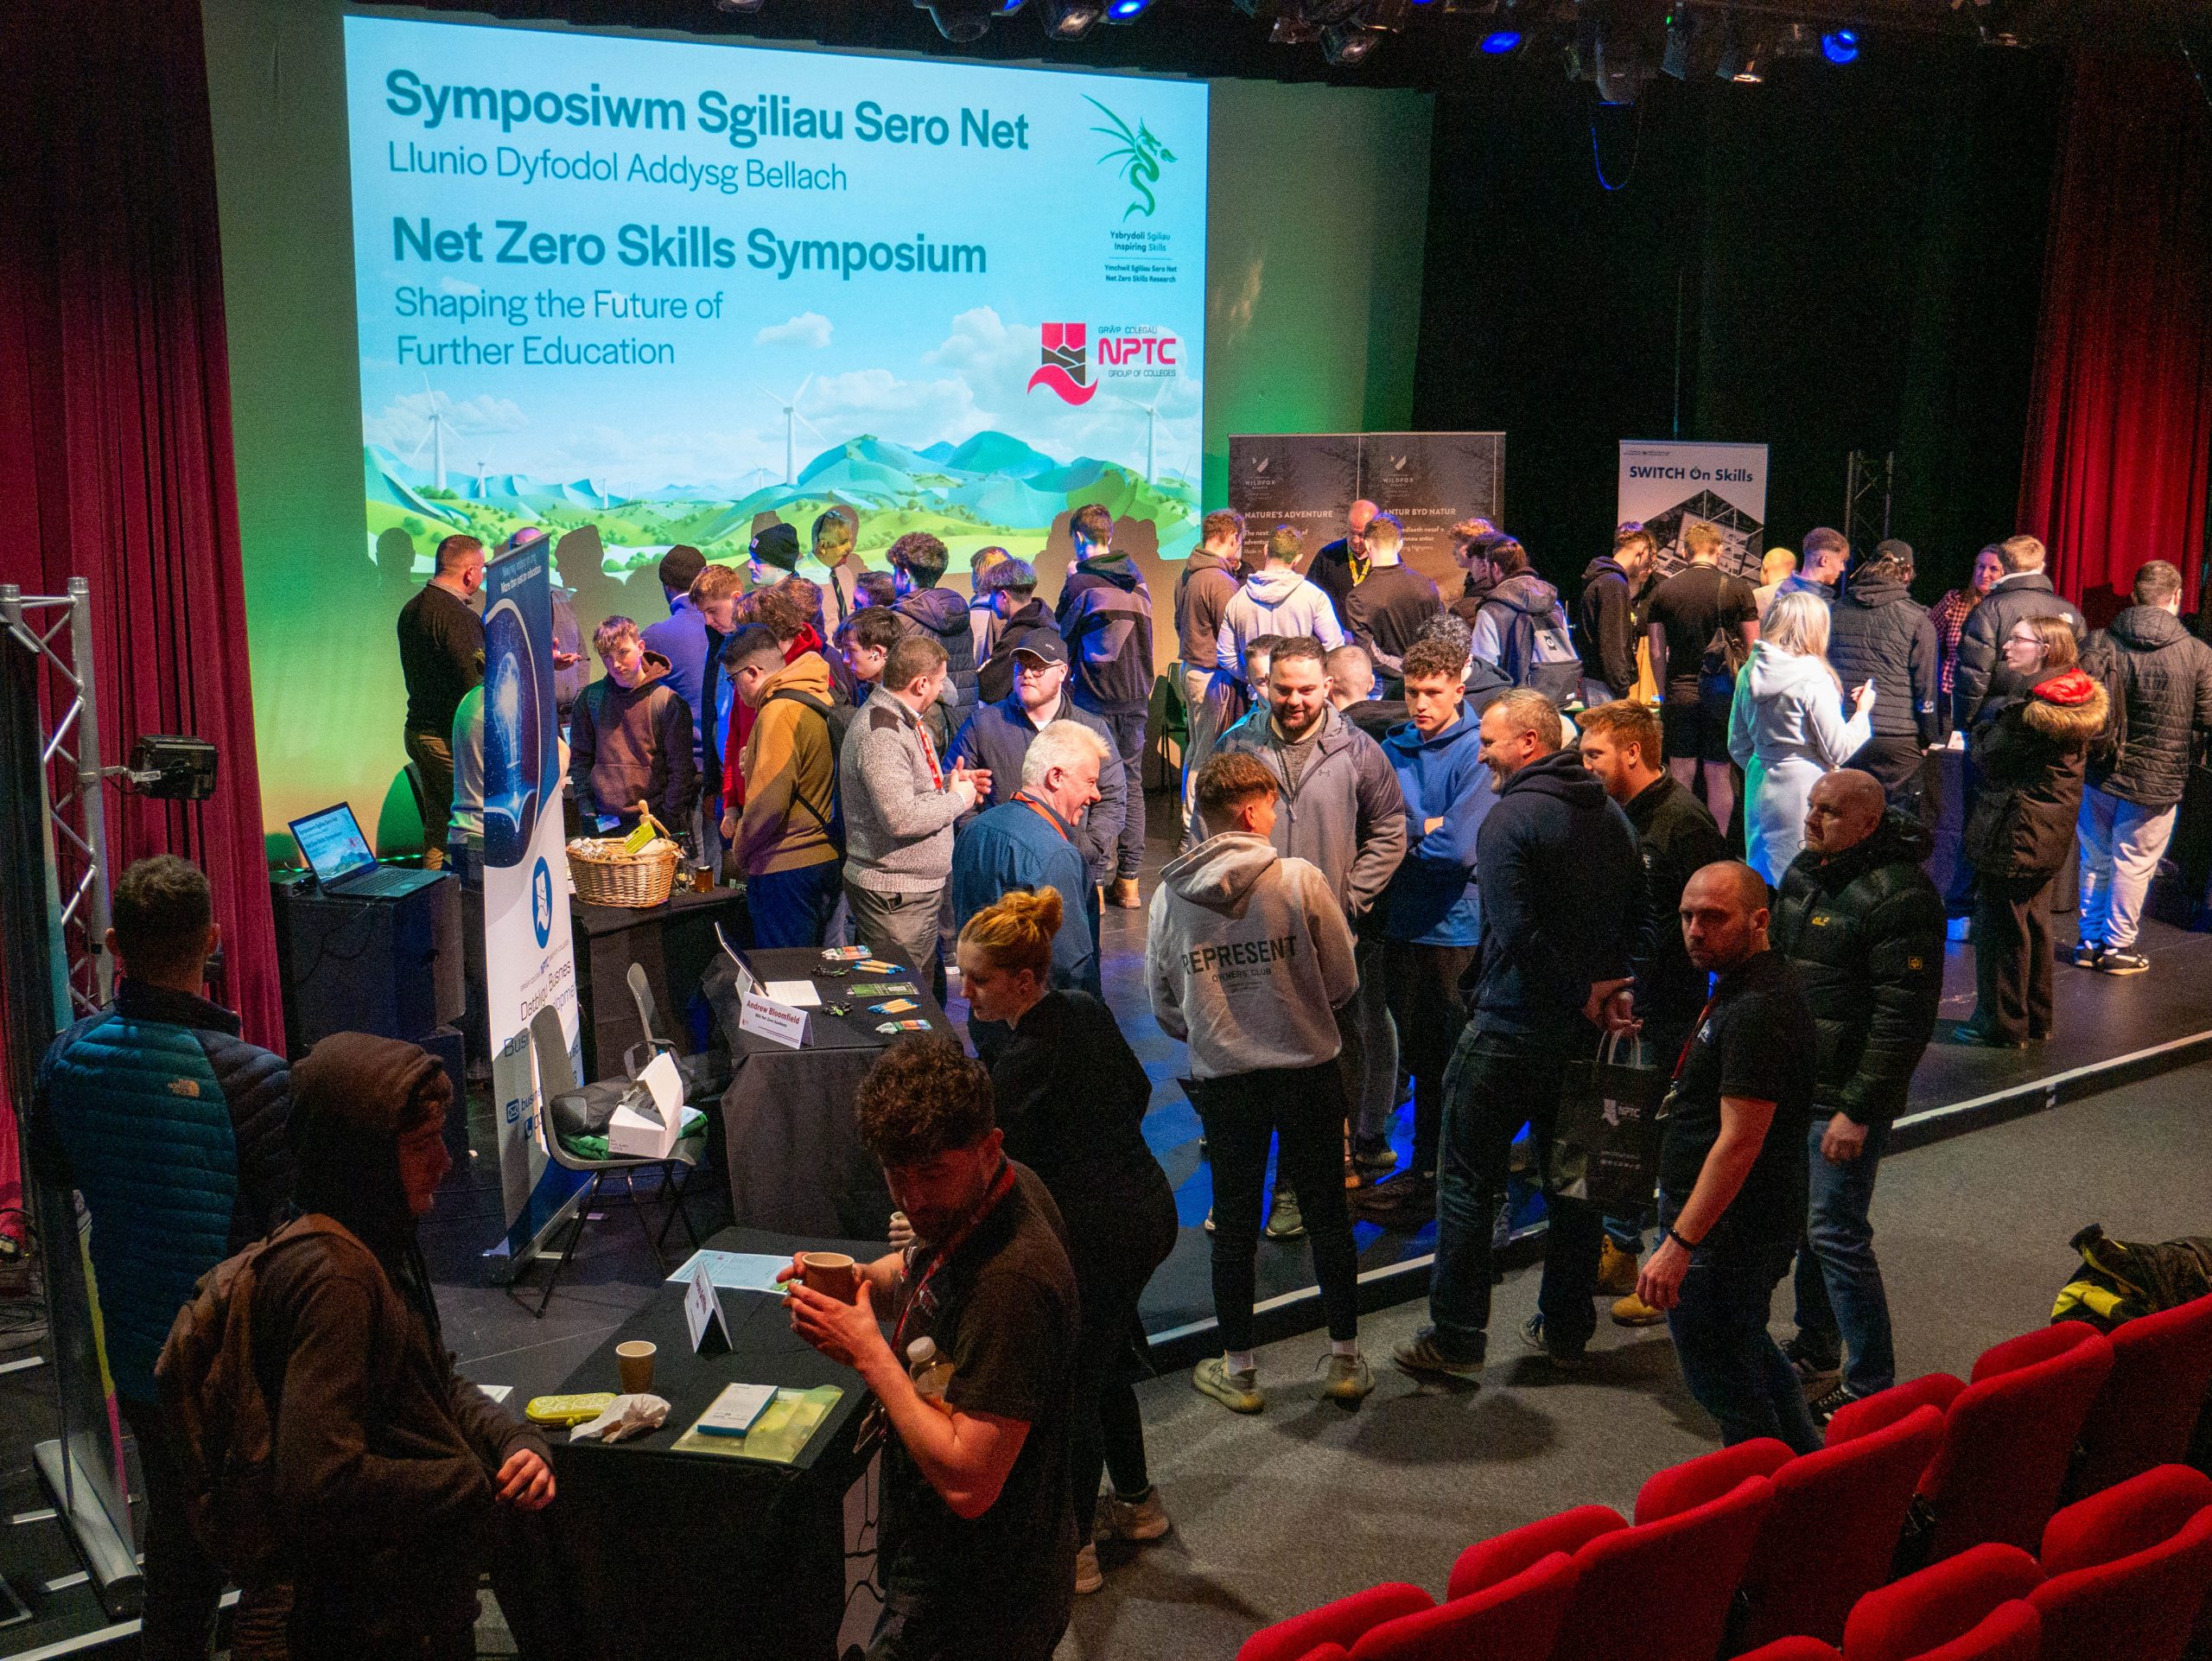 Net Zero Skills Symposium event with pop up stands and guests networking and chatting at the Nidum Theatre.